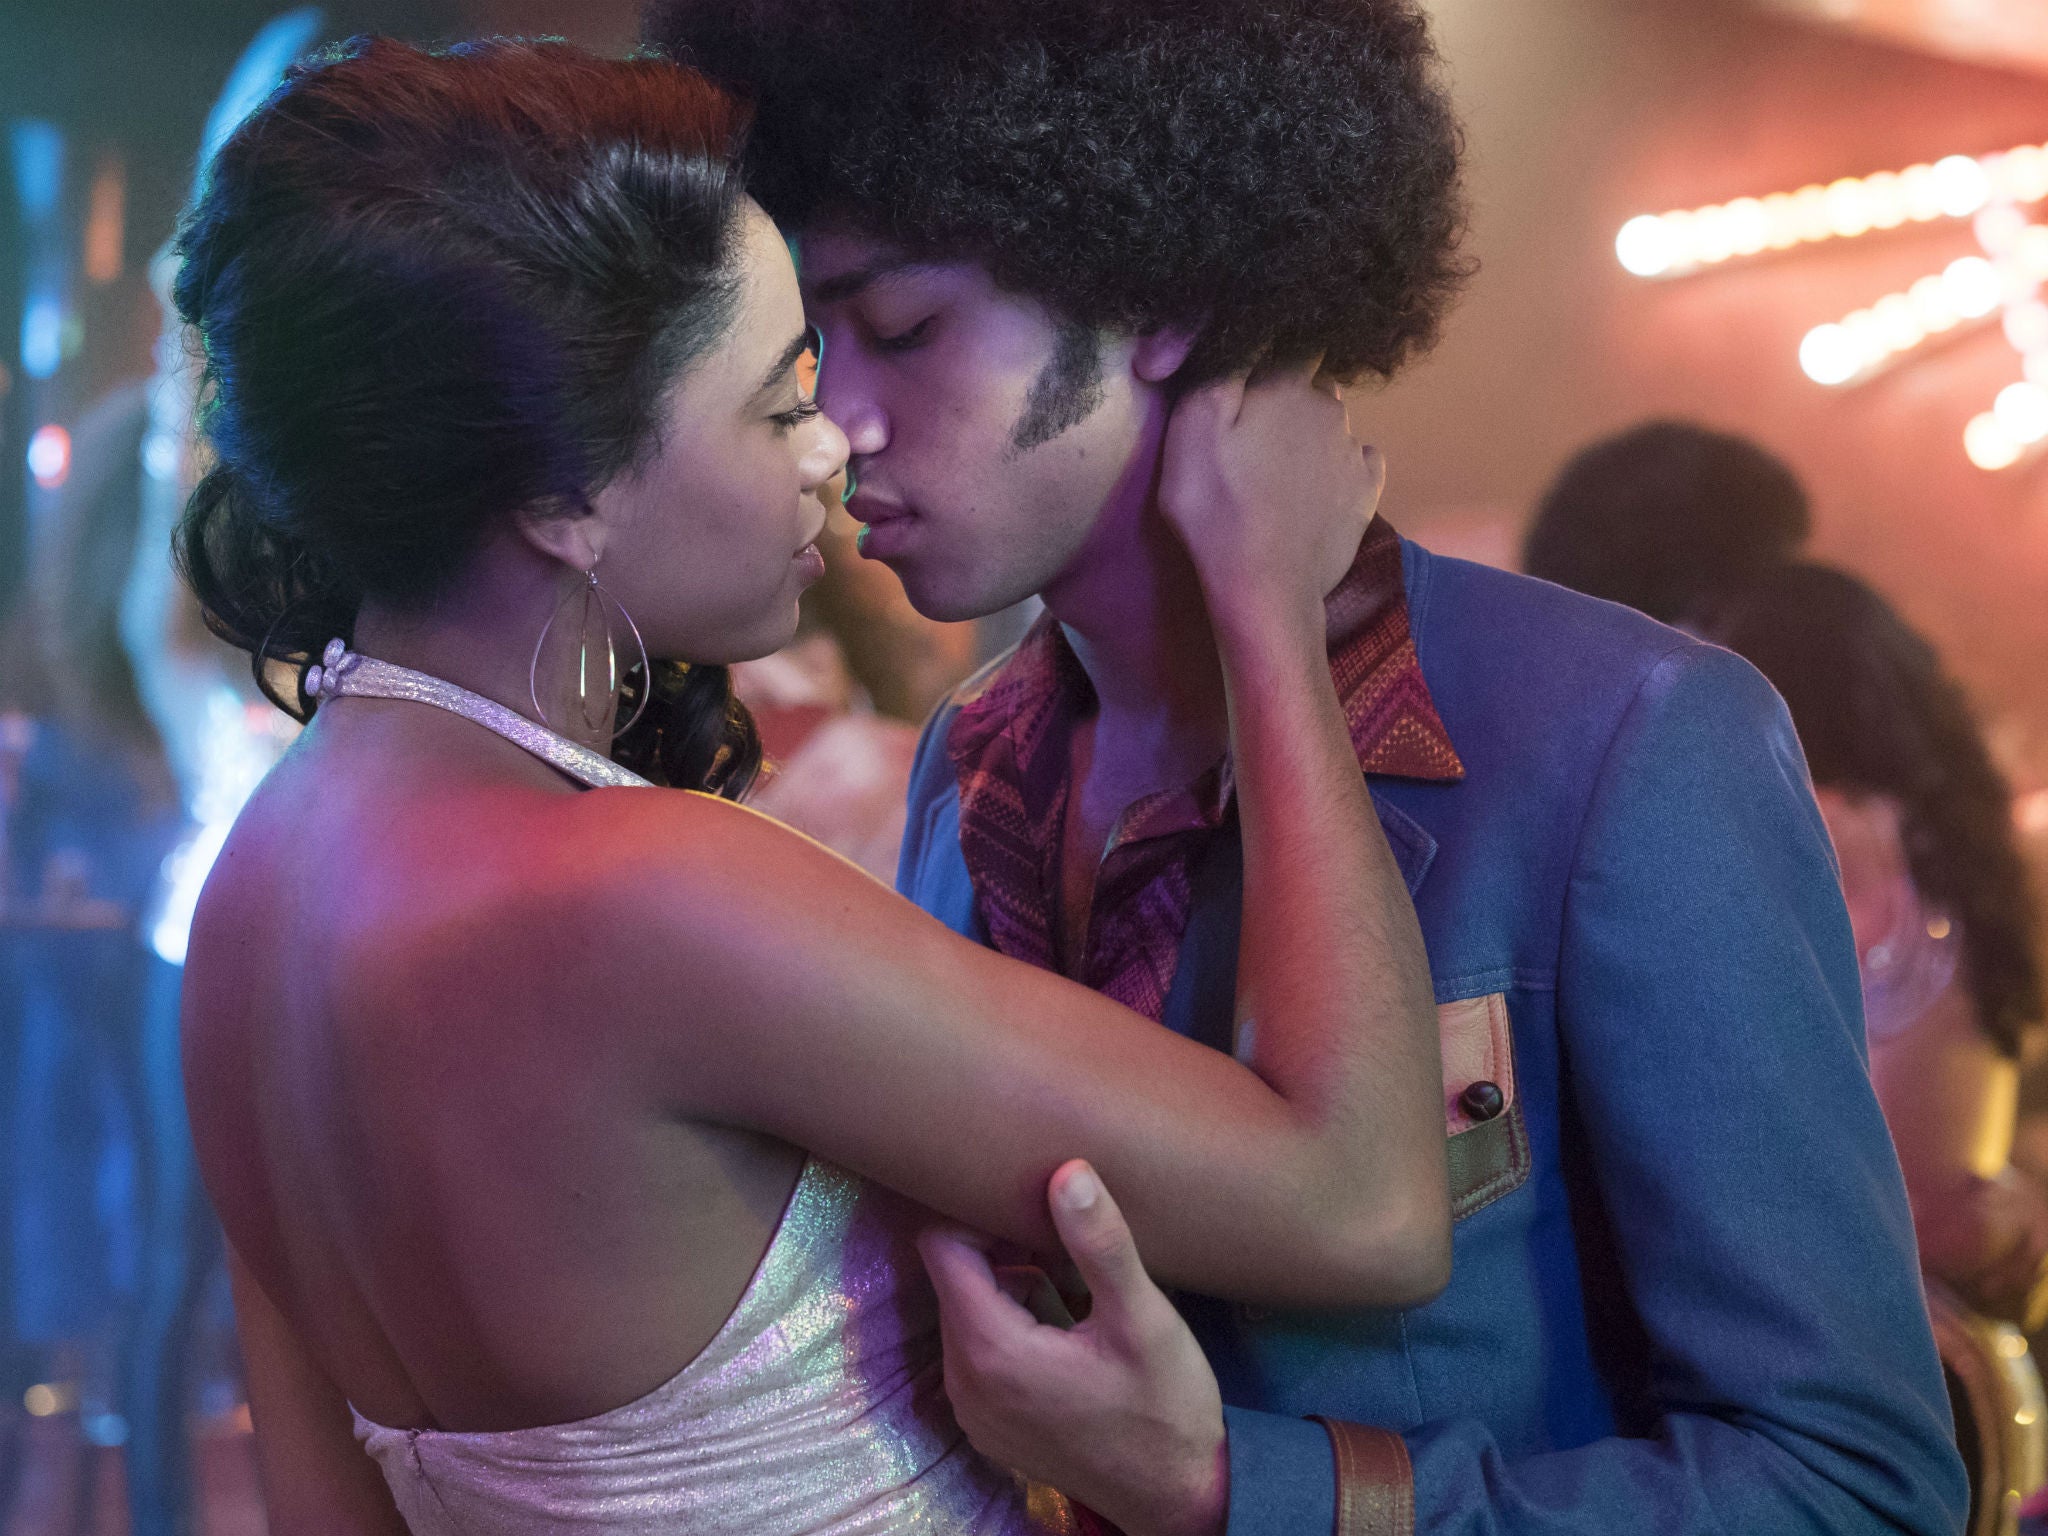 Hip hop drama The Get Down premieres on Netflix on 12 August